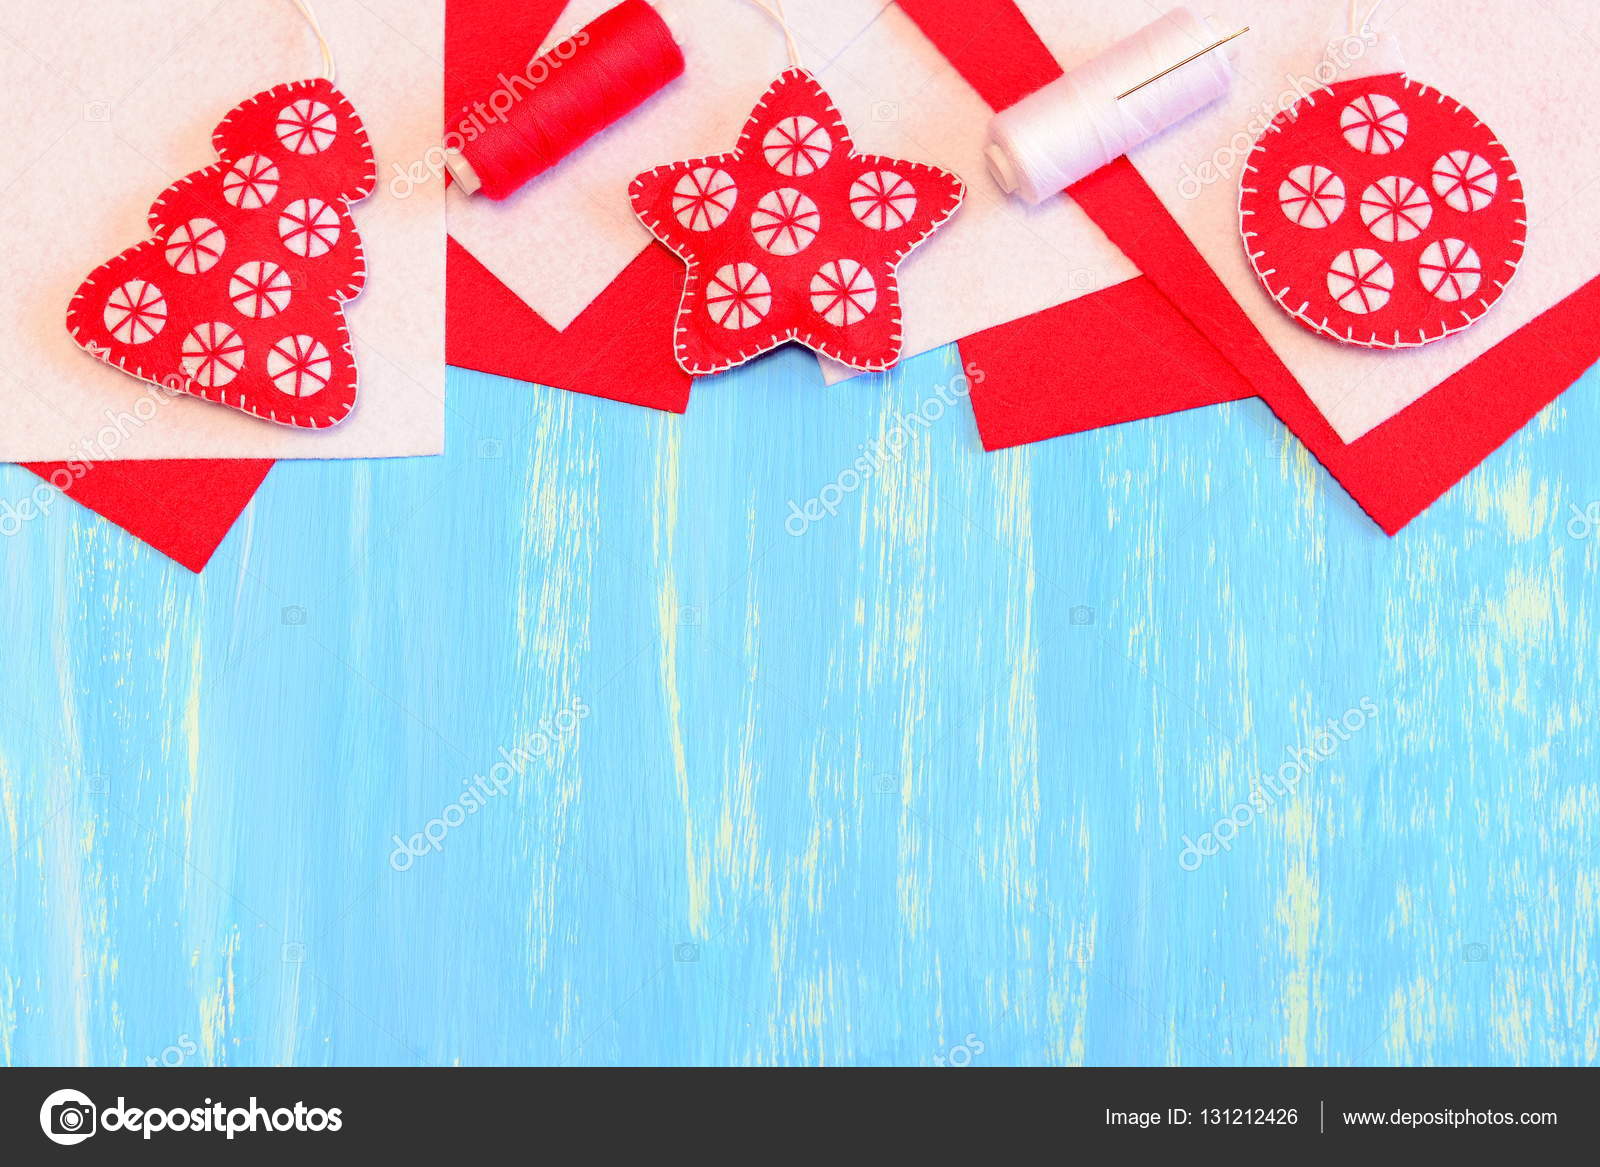 Christmas tree ornaments on blue wooden background with copy space